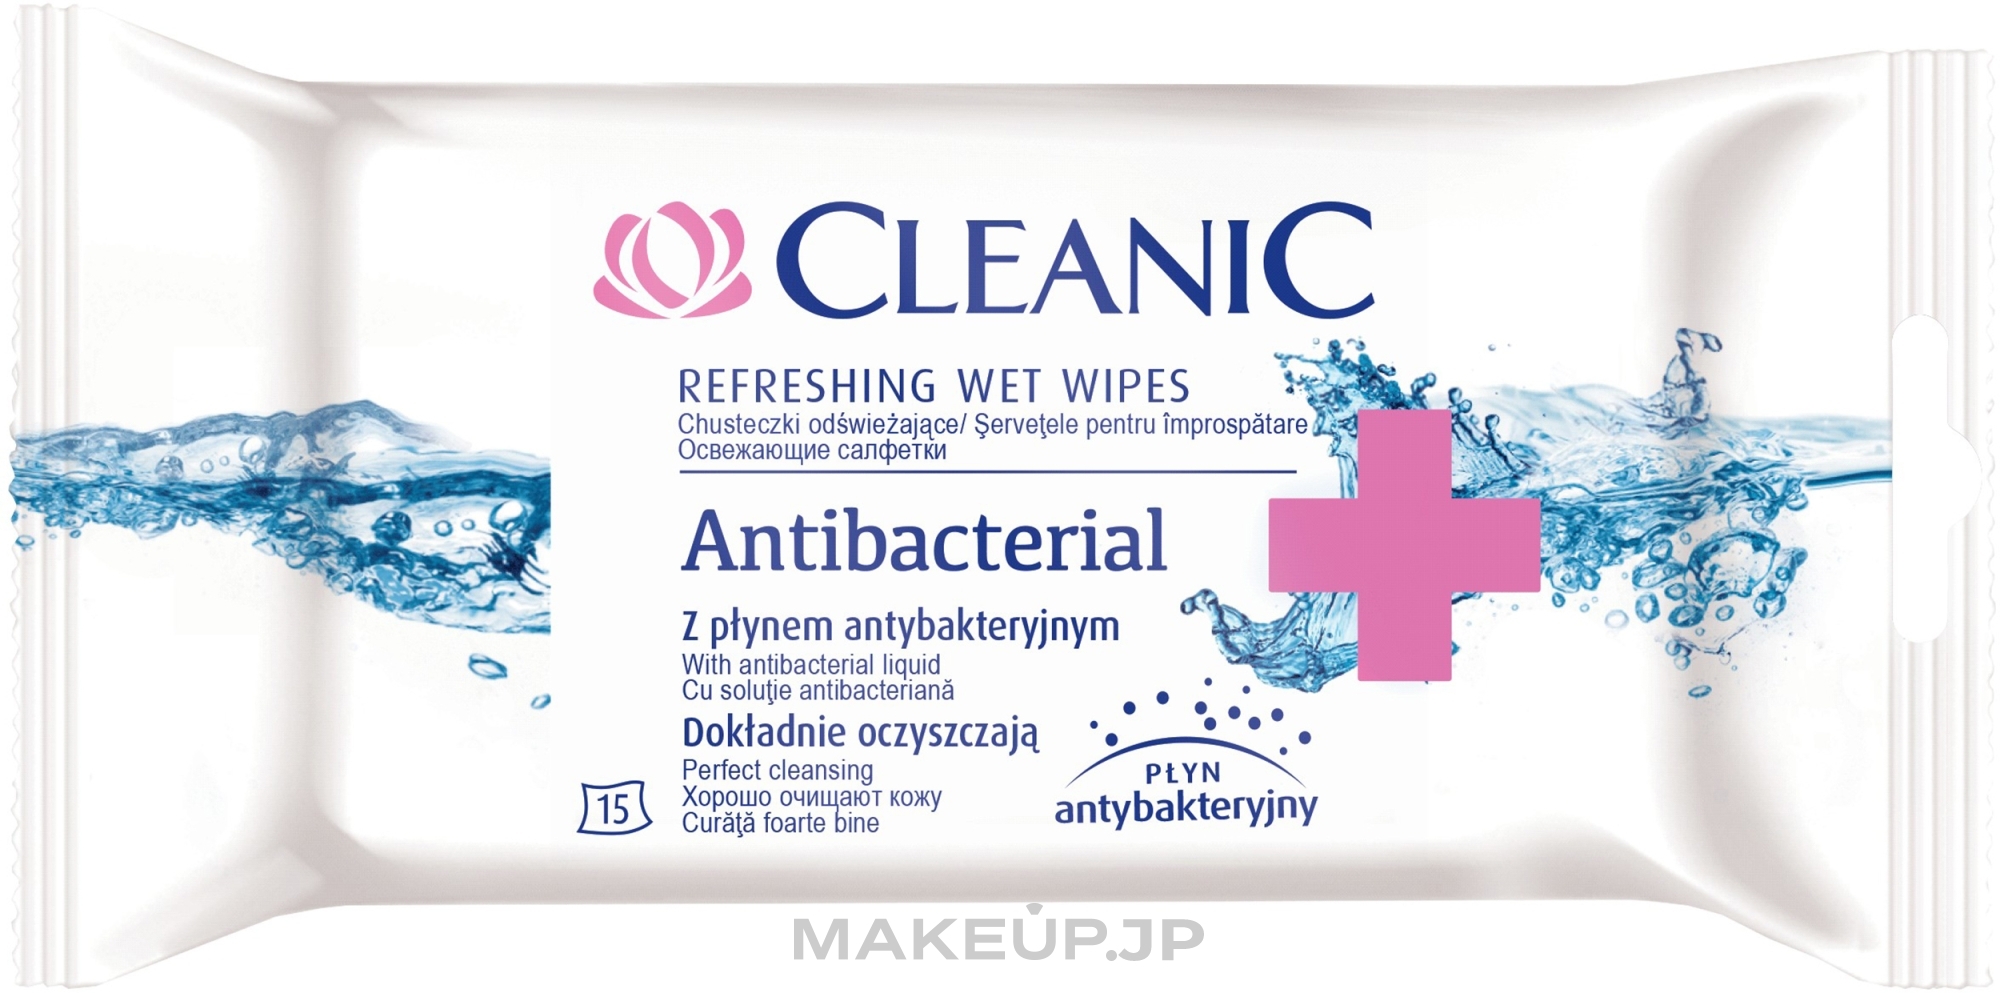 Refreshing Antibacterial Wipes, 15 pcs - Cleanic Antibacterial Wipes — photo 15 szt.